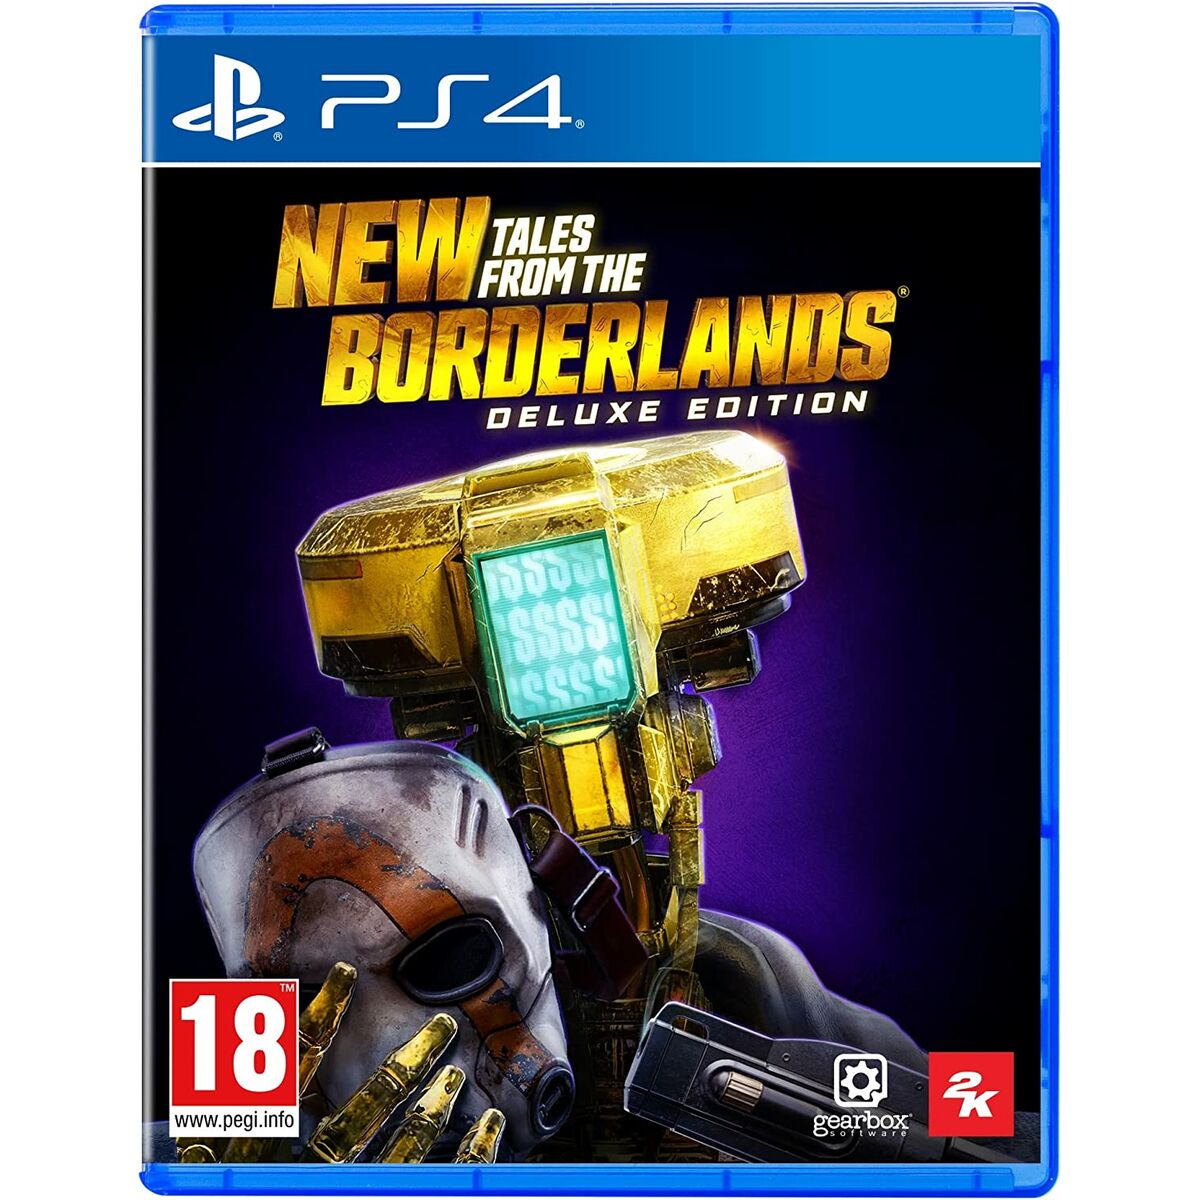 Jeu vidéo PlayStation 4 2K GAMES New Tales from the Borderlands Deluxe Edition